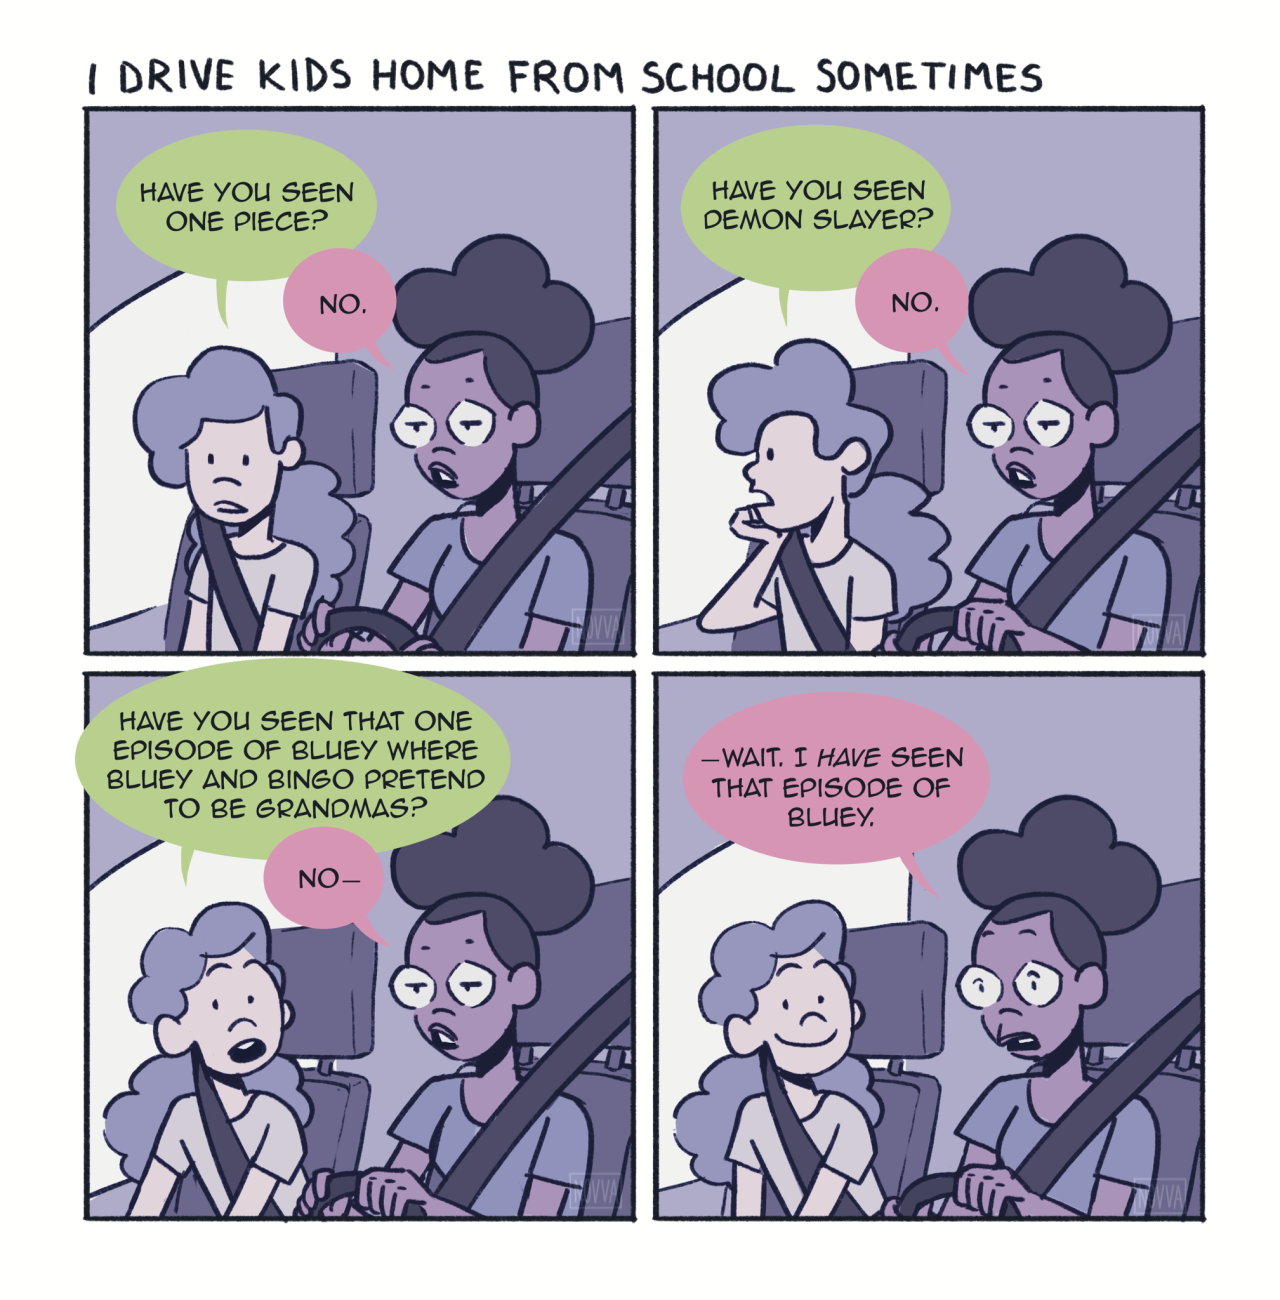 A 4-panel comic of a black girl with a puff and glasses driving a young middle school-aged girl in a car. Panel 1: Middle School girl: Have you seen one piece? Driver: No. Panel 2: Middle Schooler: Have you seen Demon Slayer? Driver: No. Panel 3: Middle Schooler: Have you seen that one episode of Bluey where Bluey and Bingo pretend to be grandmas? Driver: No— Panel 4: Driver: —Wait. I HAVE seen that episode of Bluey.